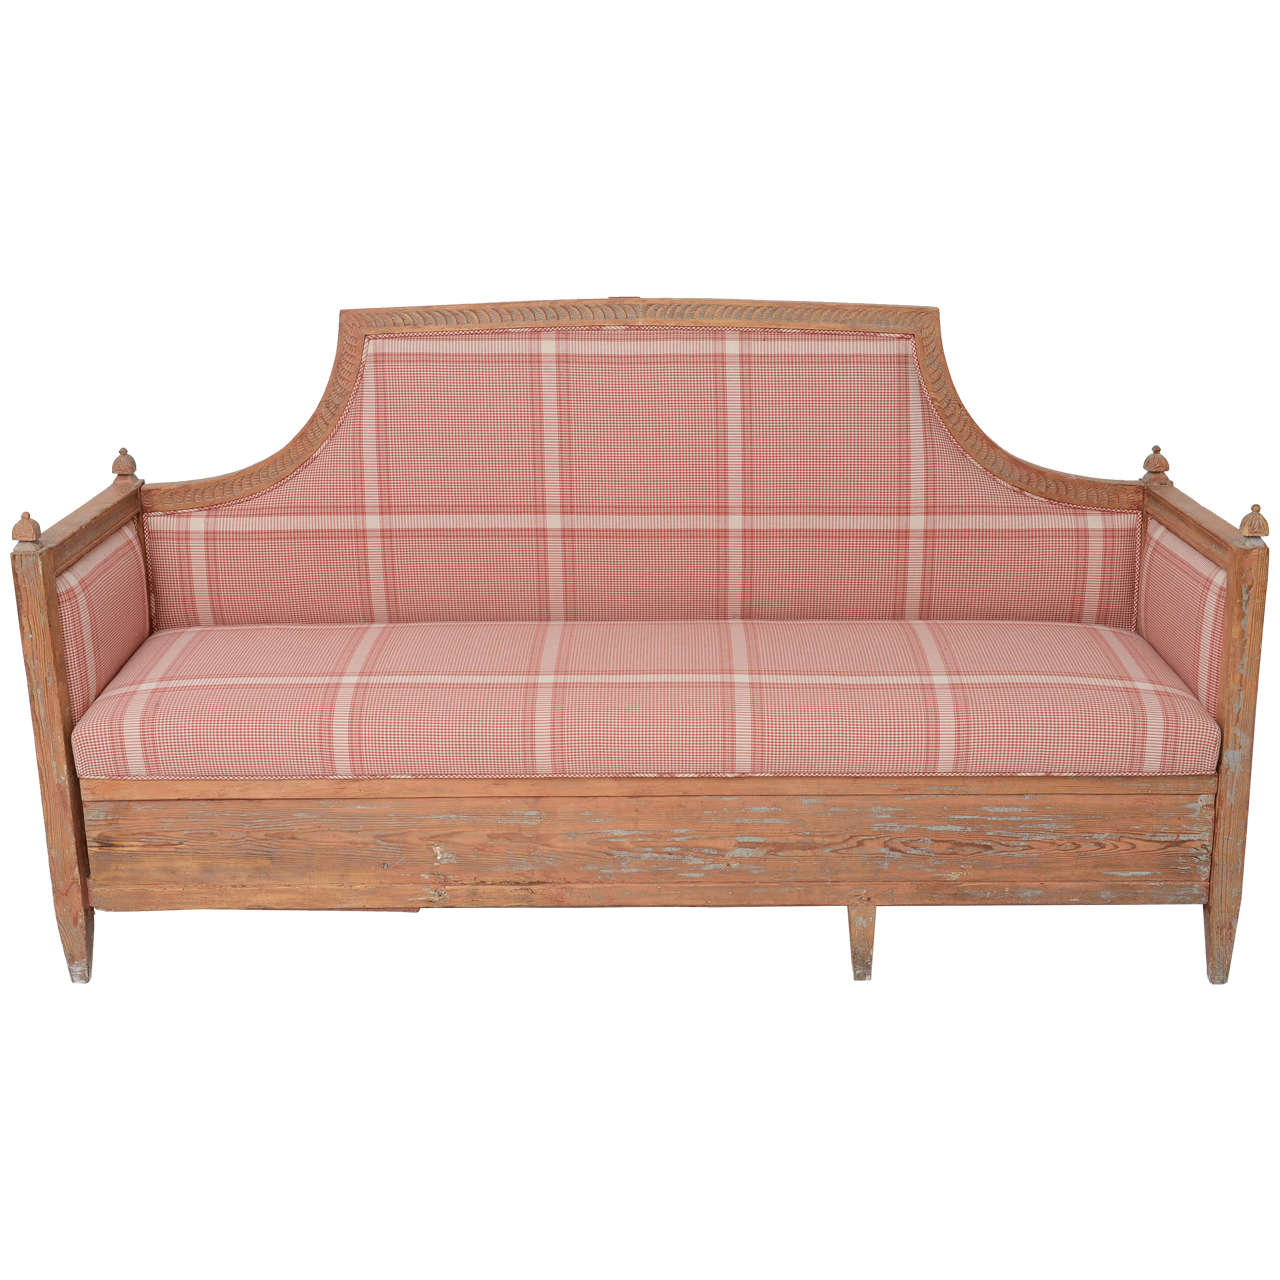 Original Stained Wooden Swedish Bench with Pull-Out Bed, circa 1810